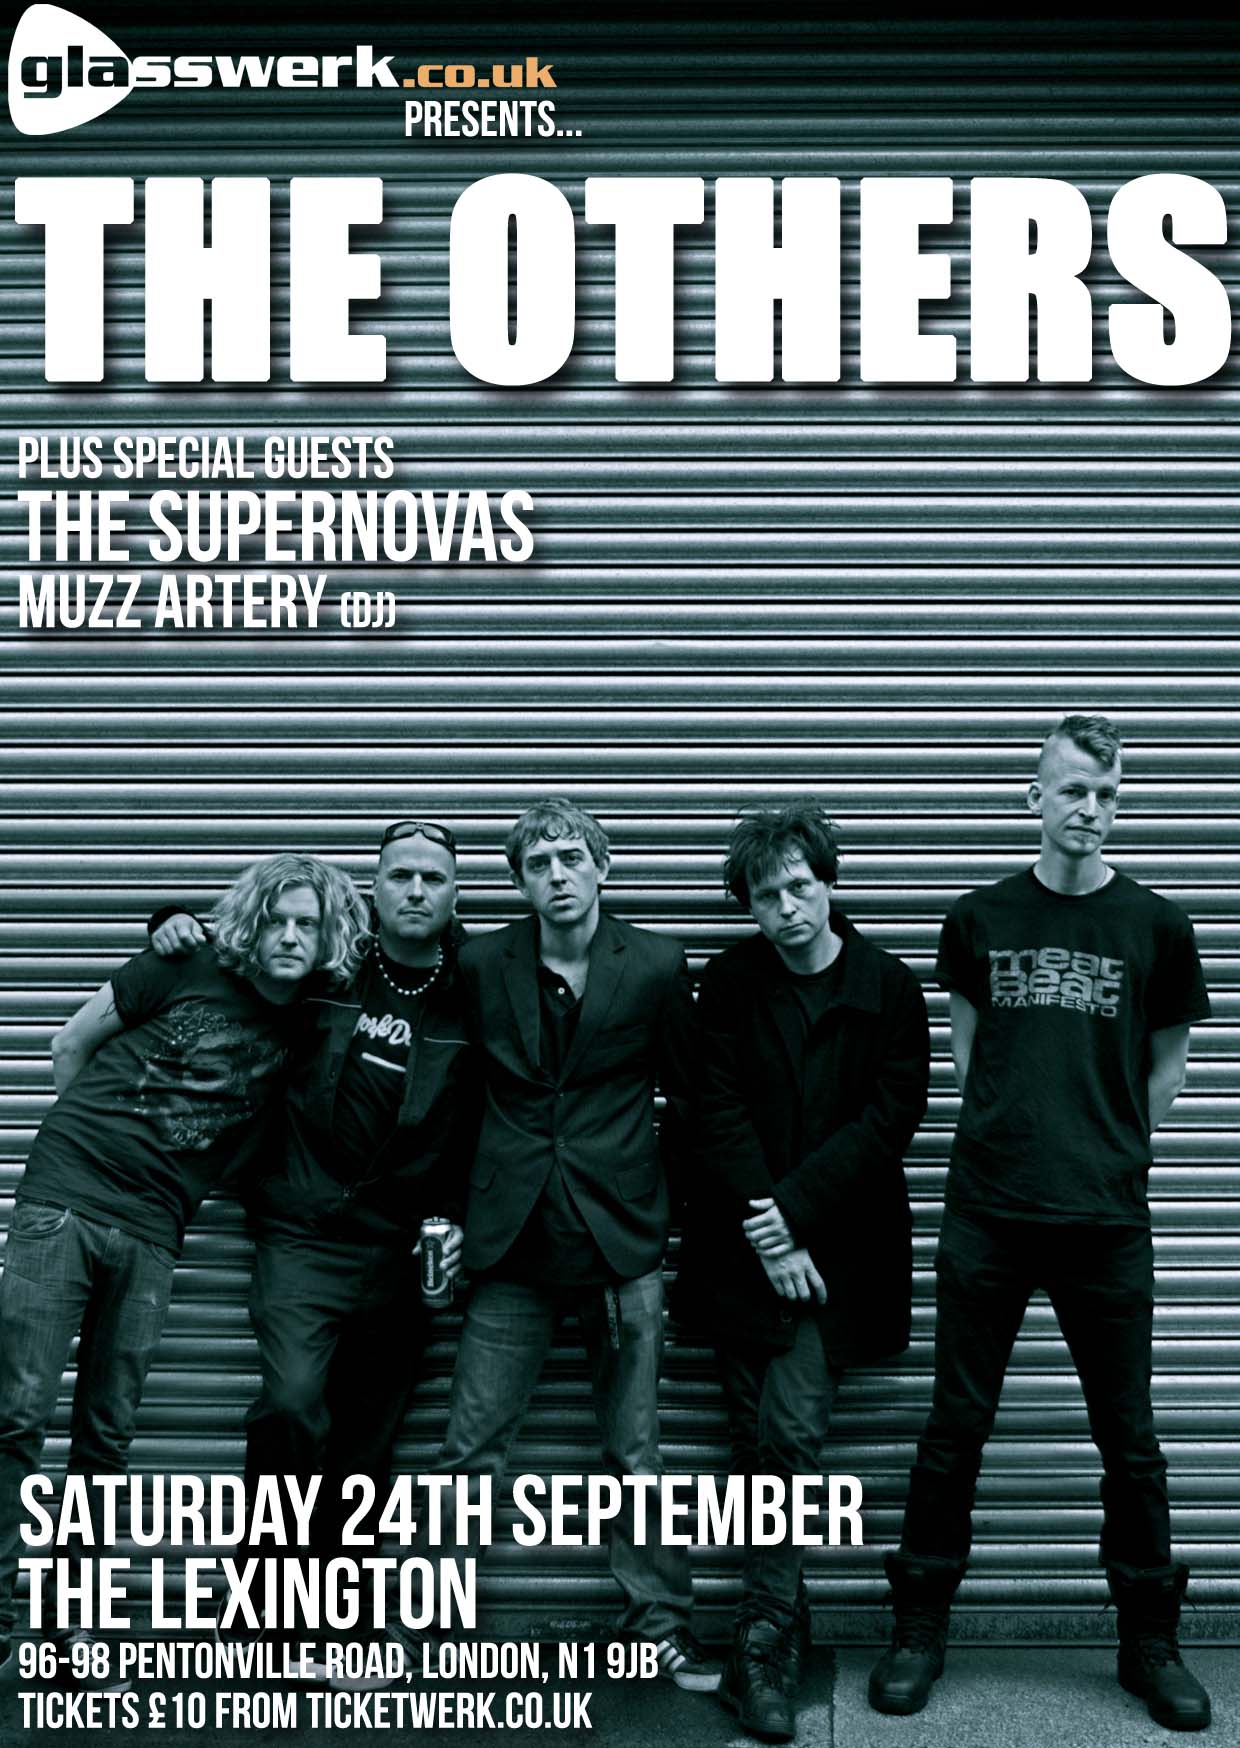 The Others @ The Lexington - Saturday 24th September